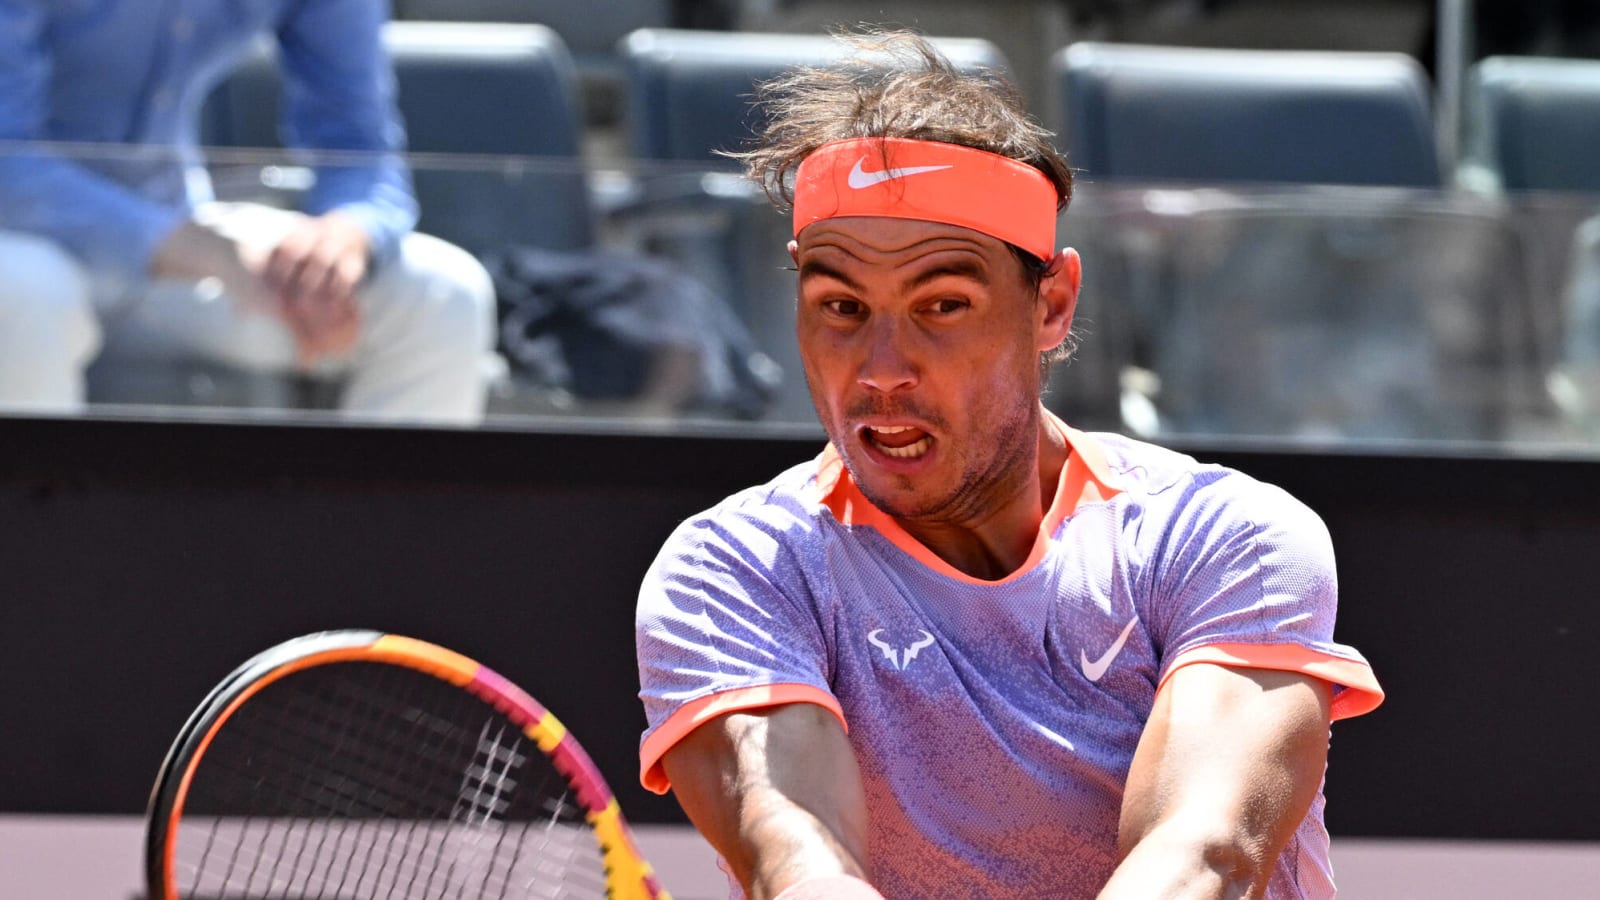 'If something happens, it happens,' Rafael Nadal realizes it’s the right time to go all in, as focus shifts on upcoming Roland Garros and Olympics